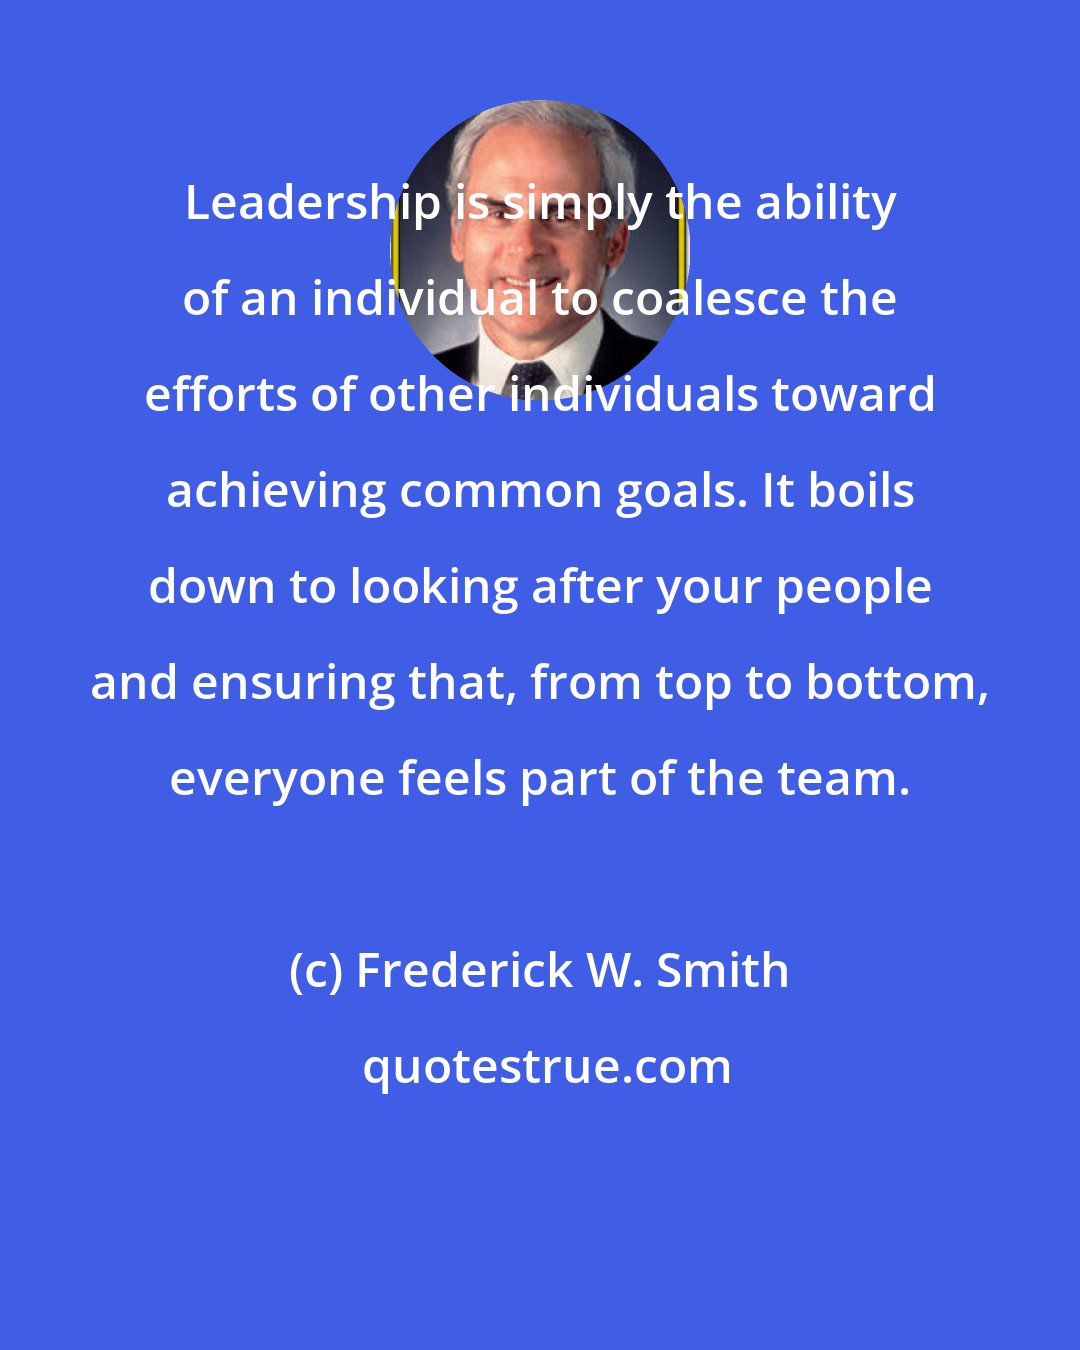 Frederick W. Smith: Leadership is simply the ability of an individual to coalesce the efforts of other individuals toward achieving common goals. It boils down to looking after your people and ensuring that, from top to bottom, everyone feels part of the team.